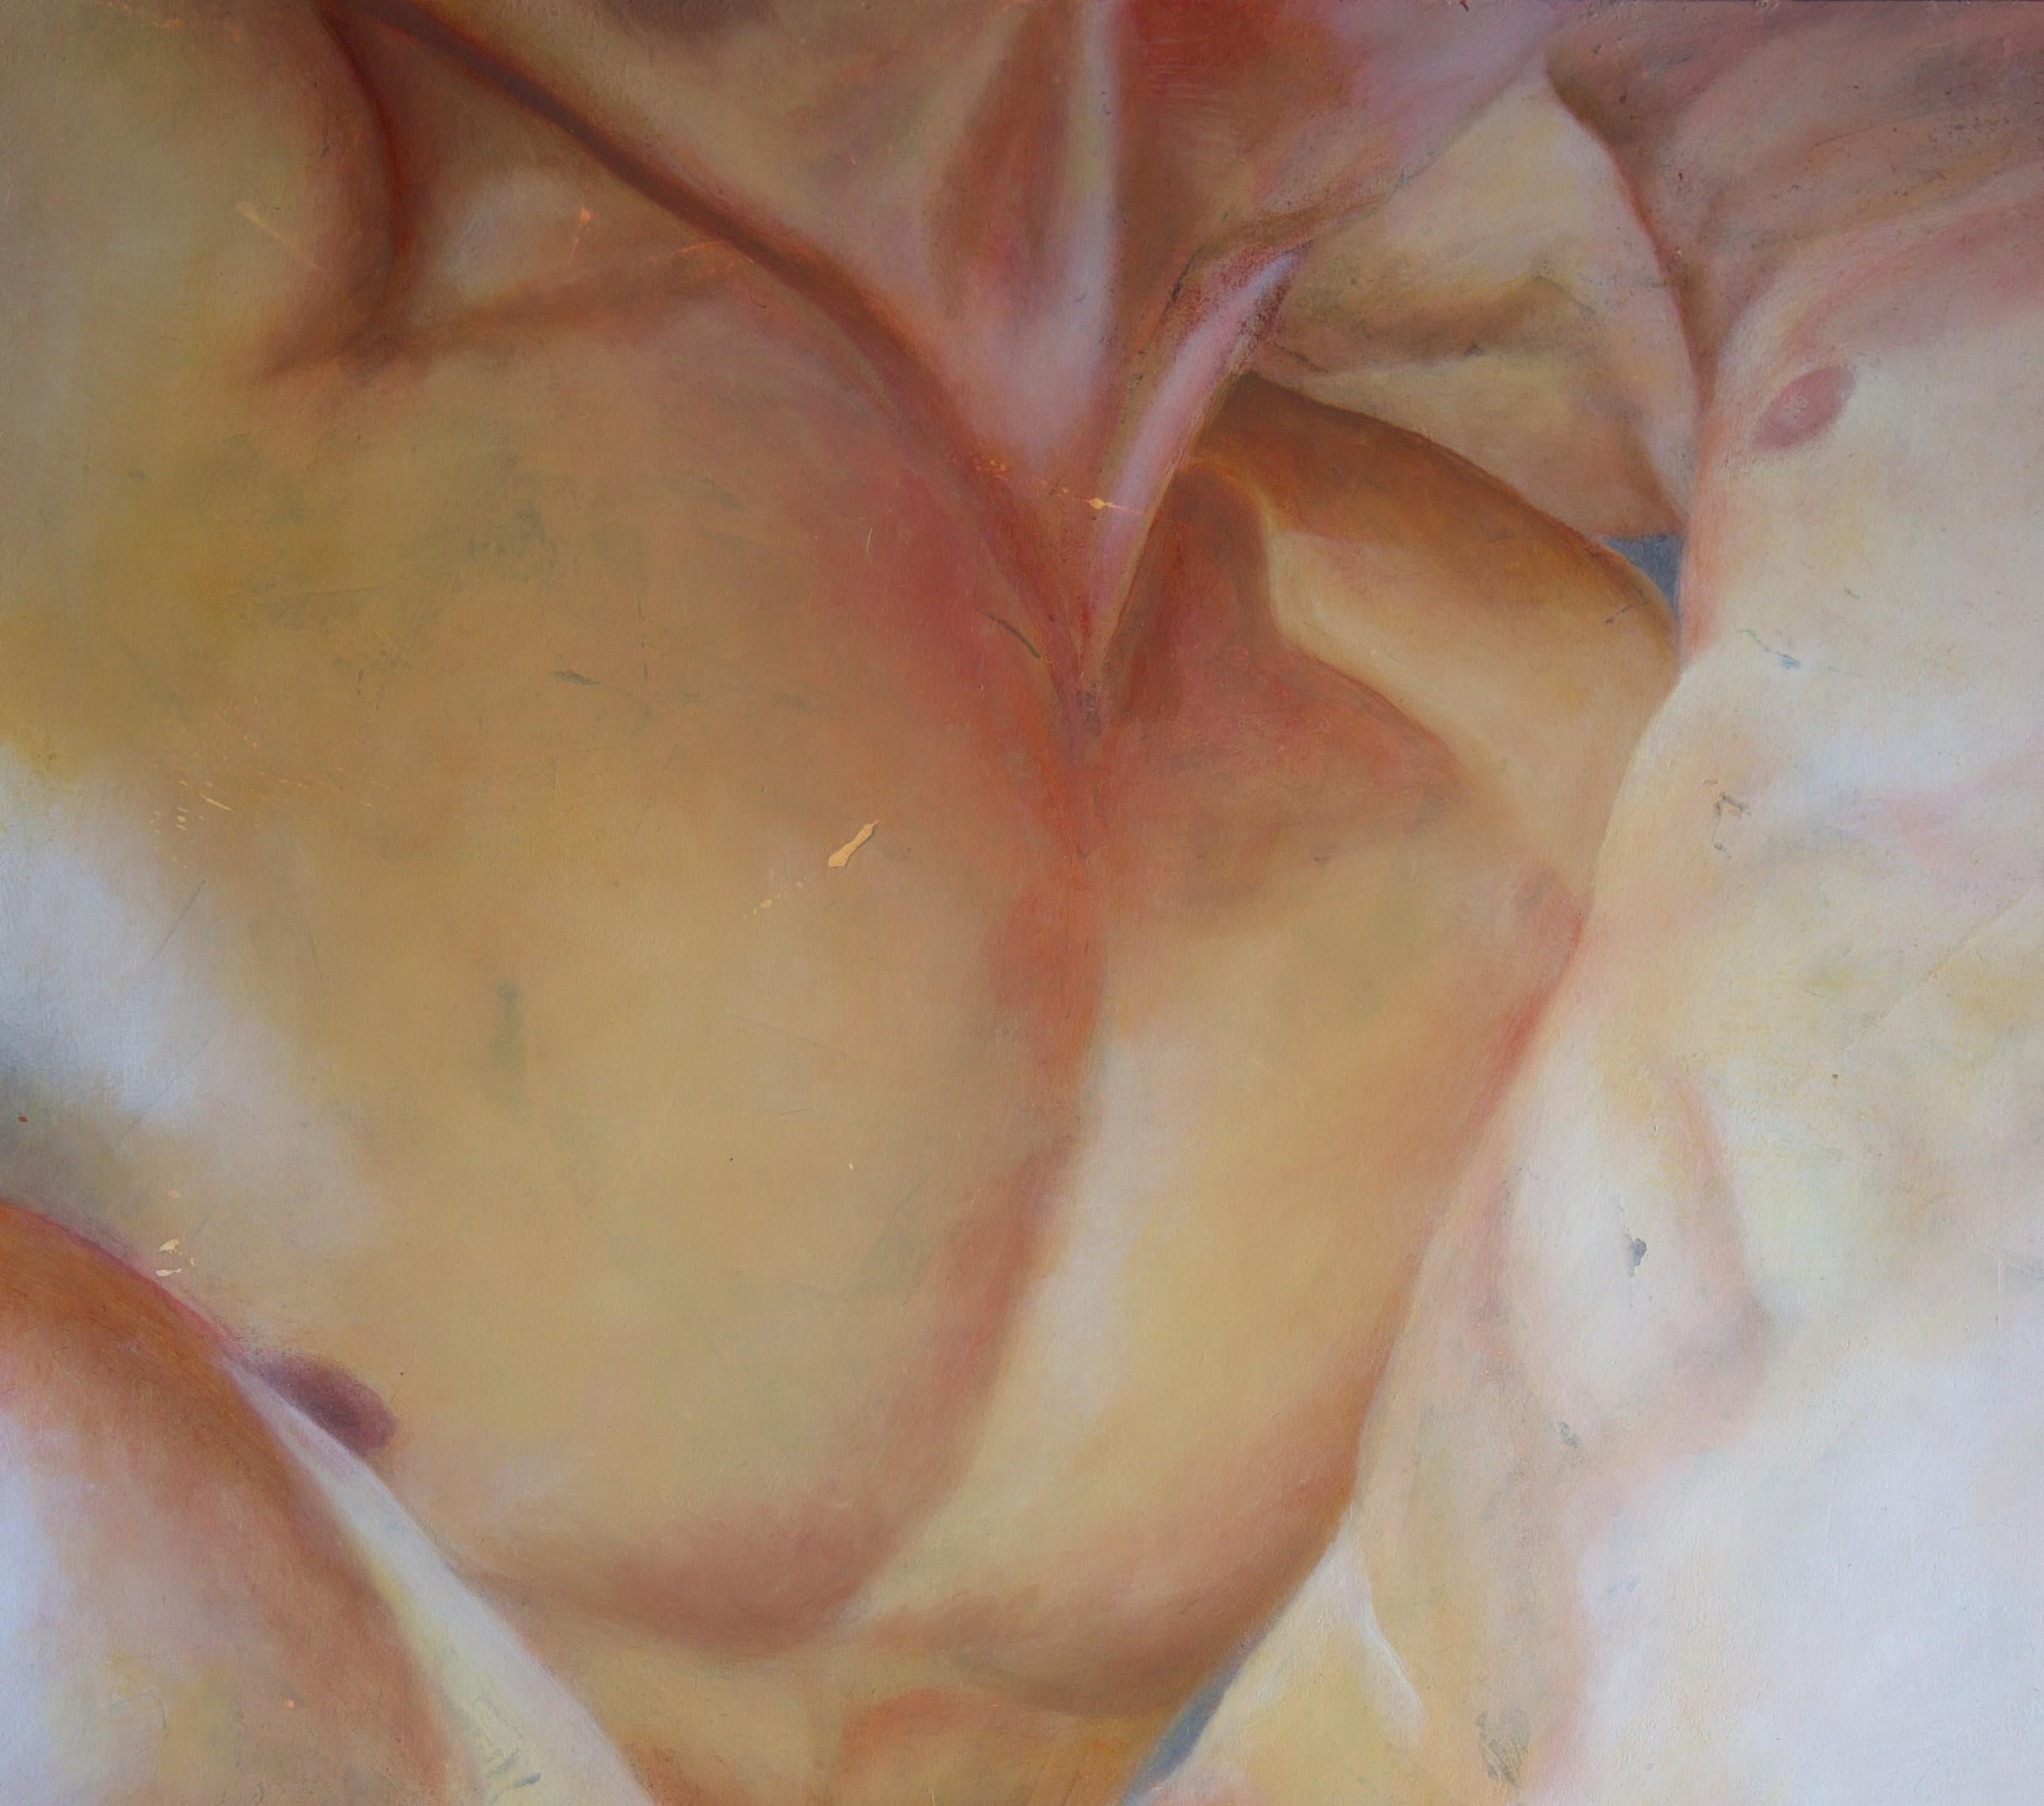 Skin Had Hope - Two Nude Torsos, Entwined, Original Oil on Panel - Painting by Rick Sindt